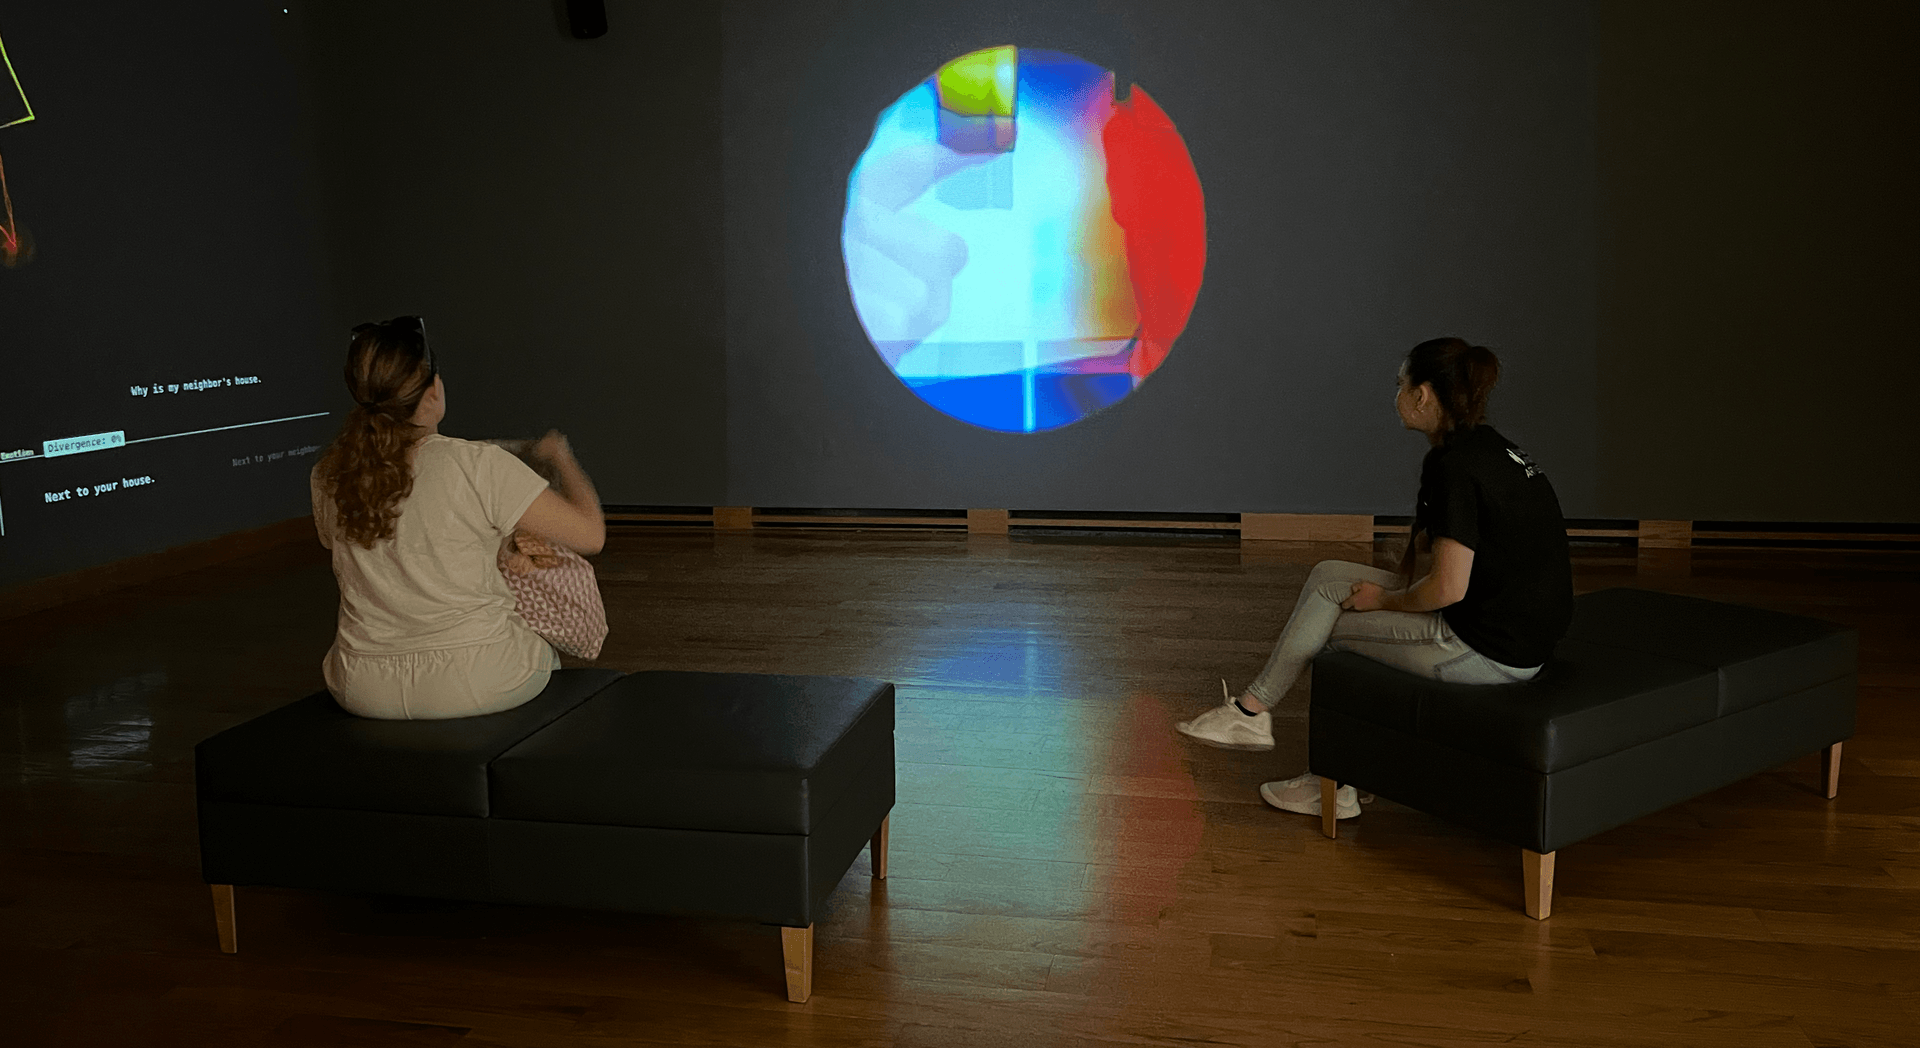 Two visitors watching the main projection, now just a small circle